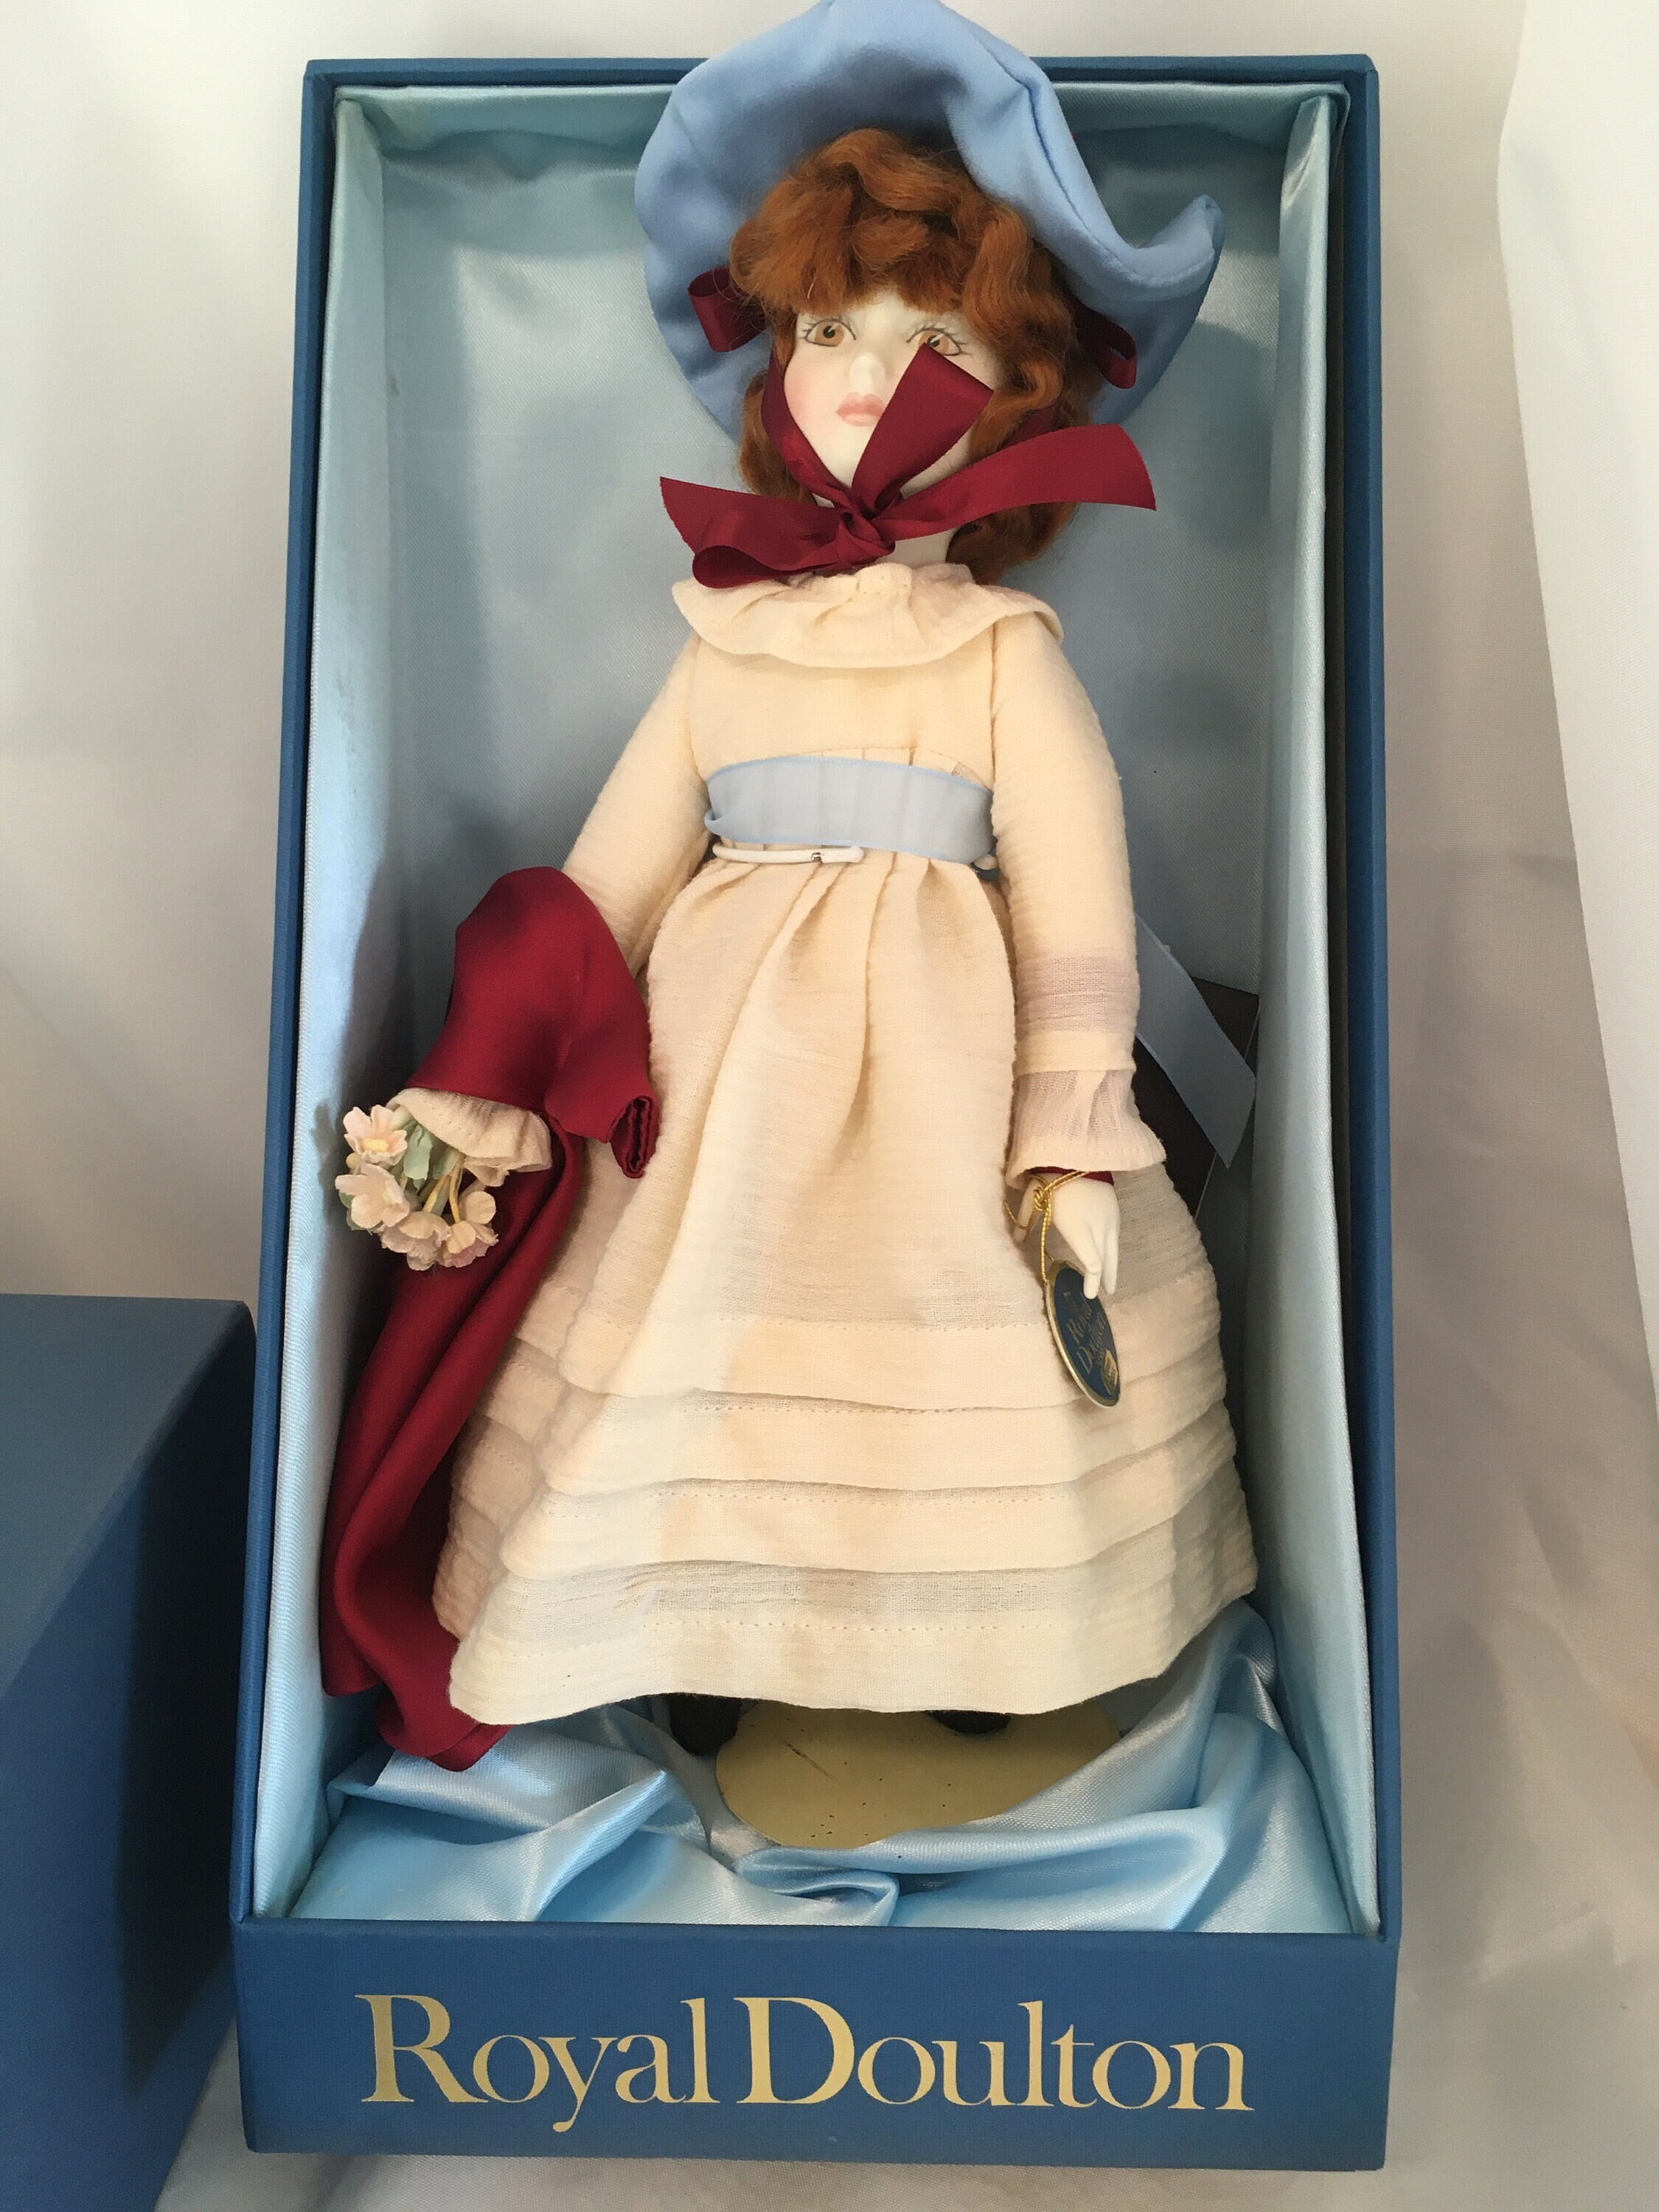 NEW in Box Peggy Nisbet Doll Royal Doulton of England - Etsy